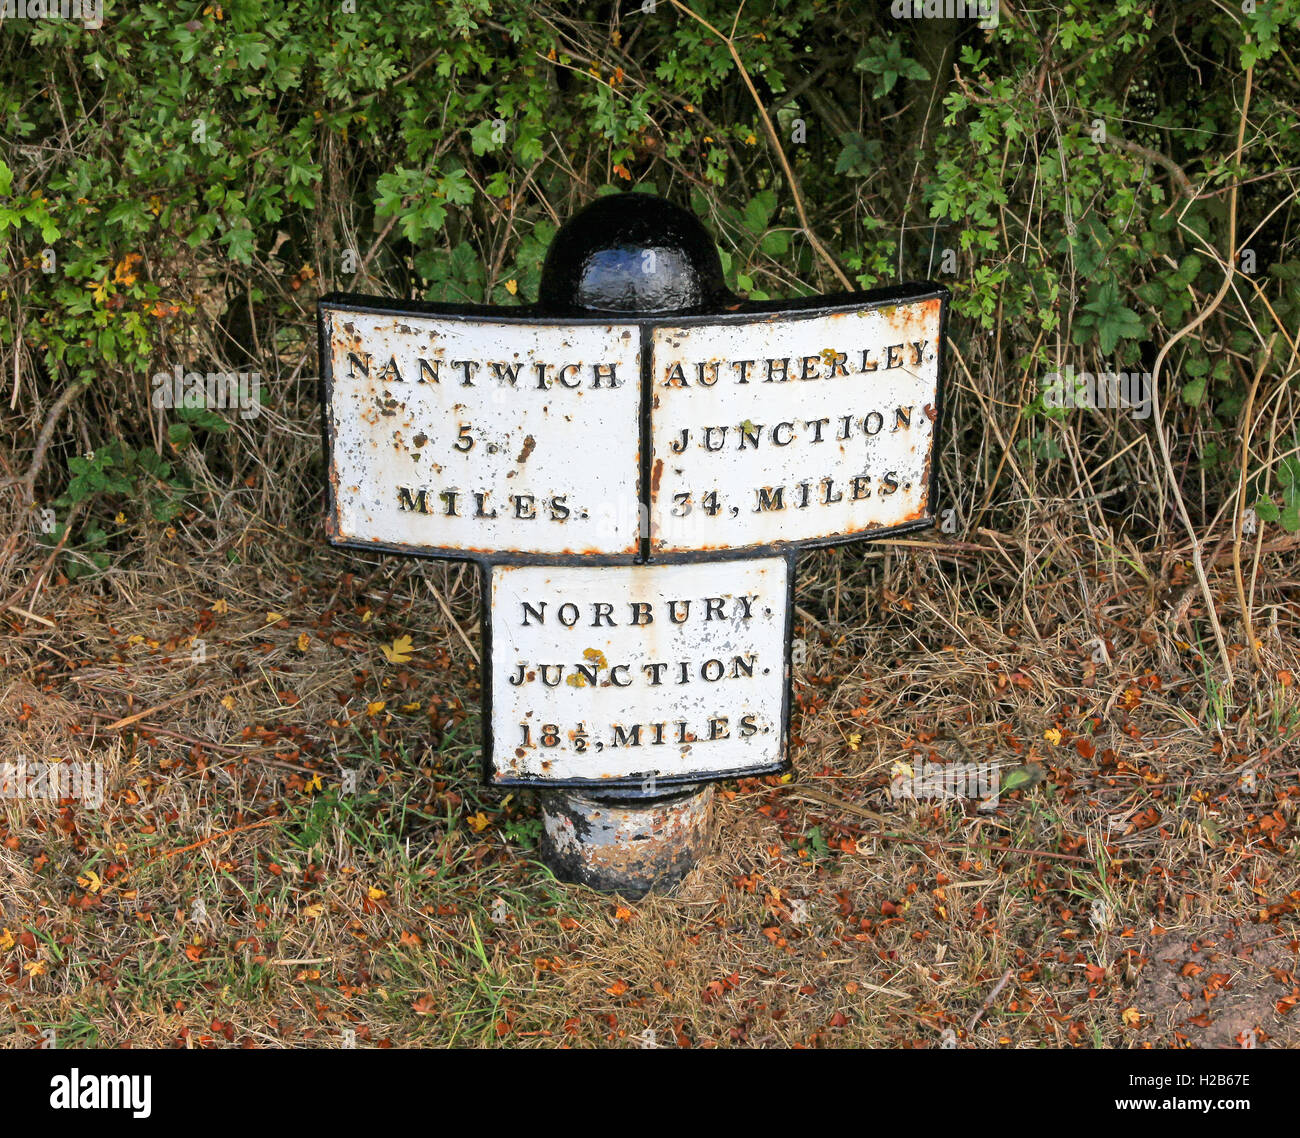 A milepost saying Nantwich, Autherly Junction and Norbury Junction on the Shropshire Union Canal Cheshire England  UK Stock Photo